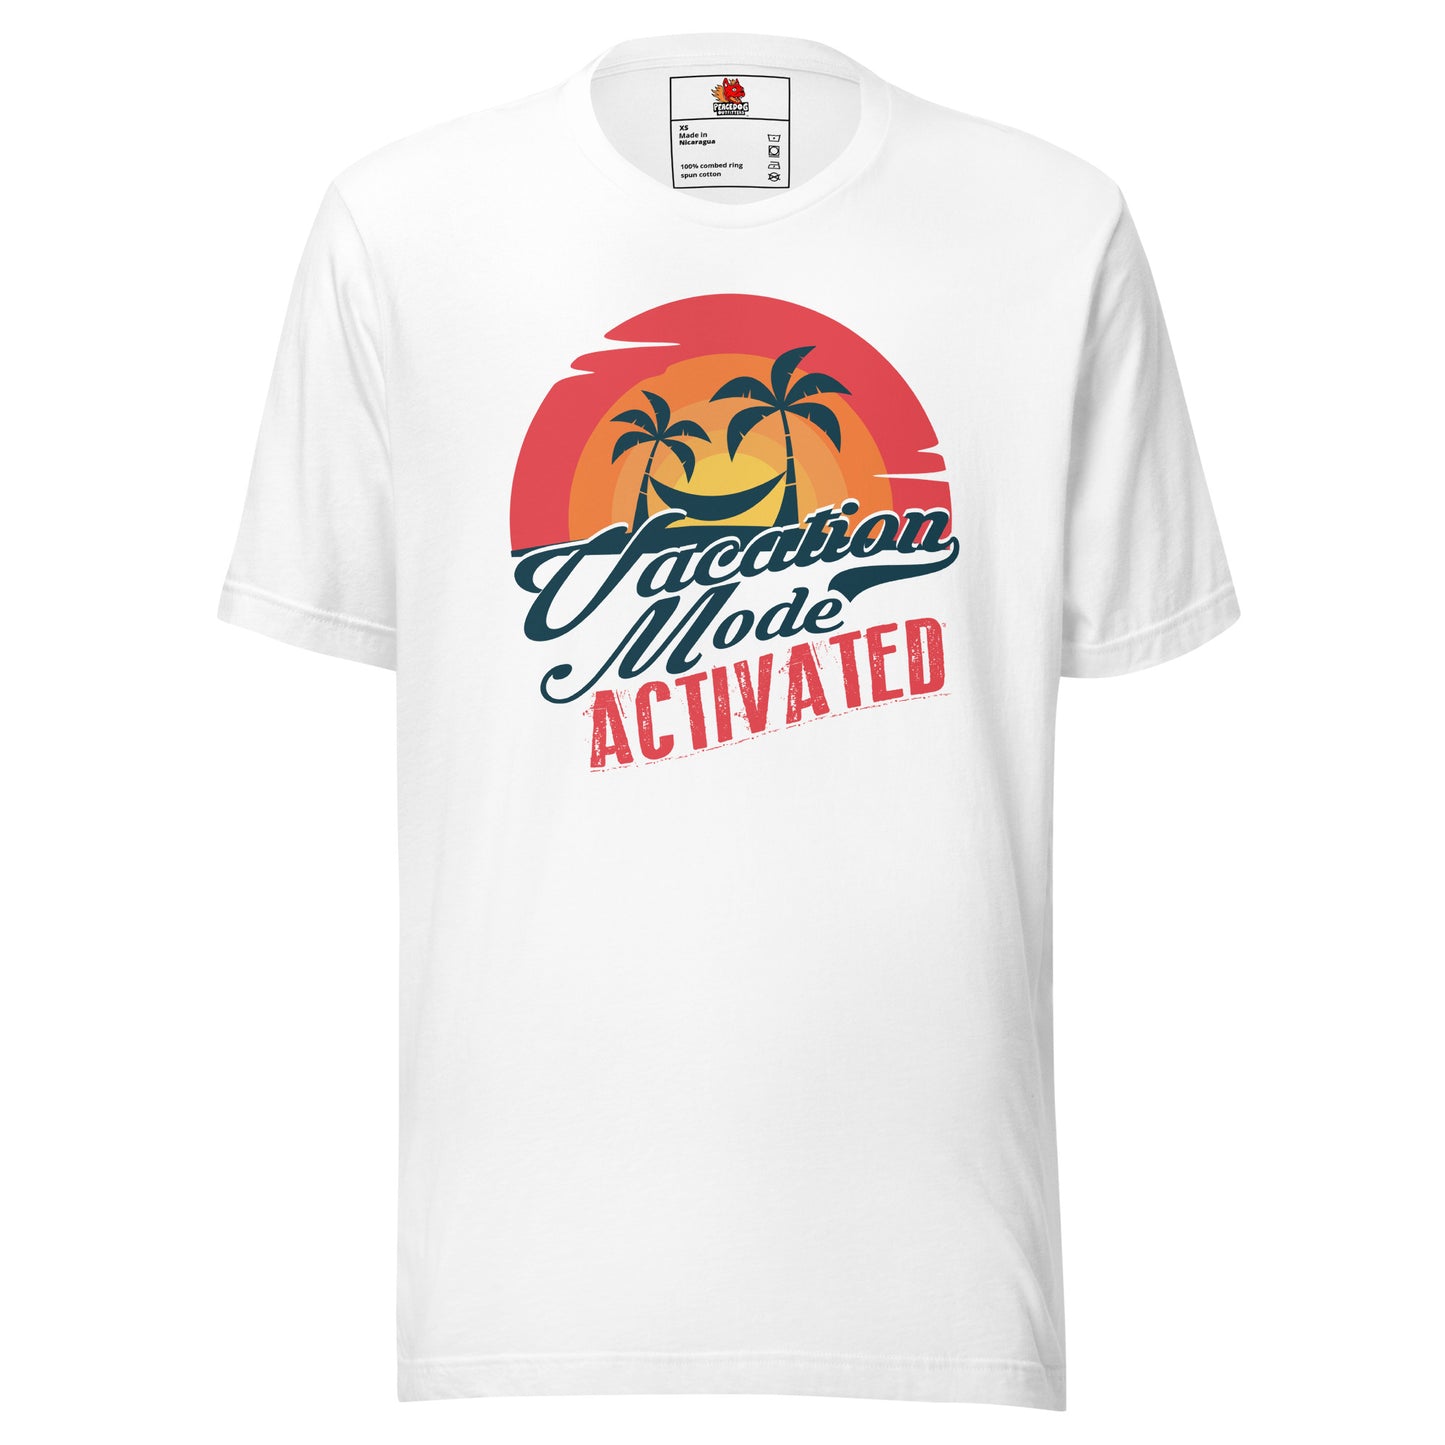 Vacation Mode Activated T-shirt